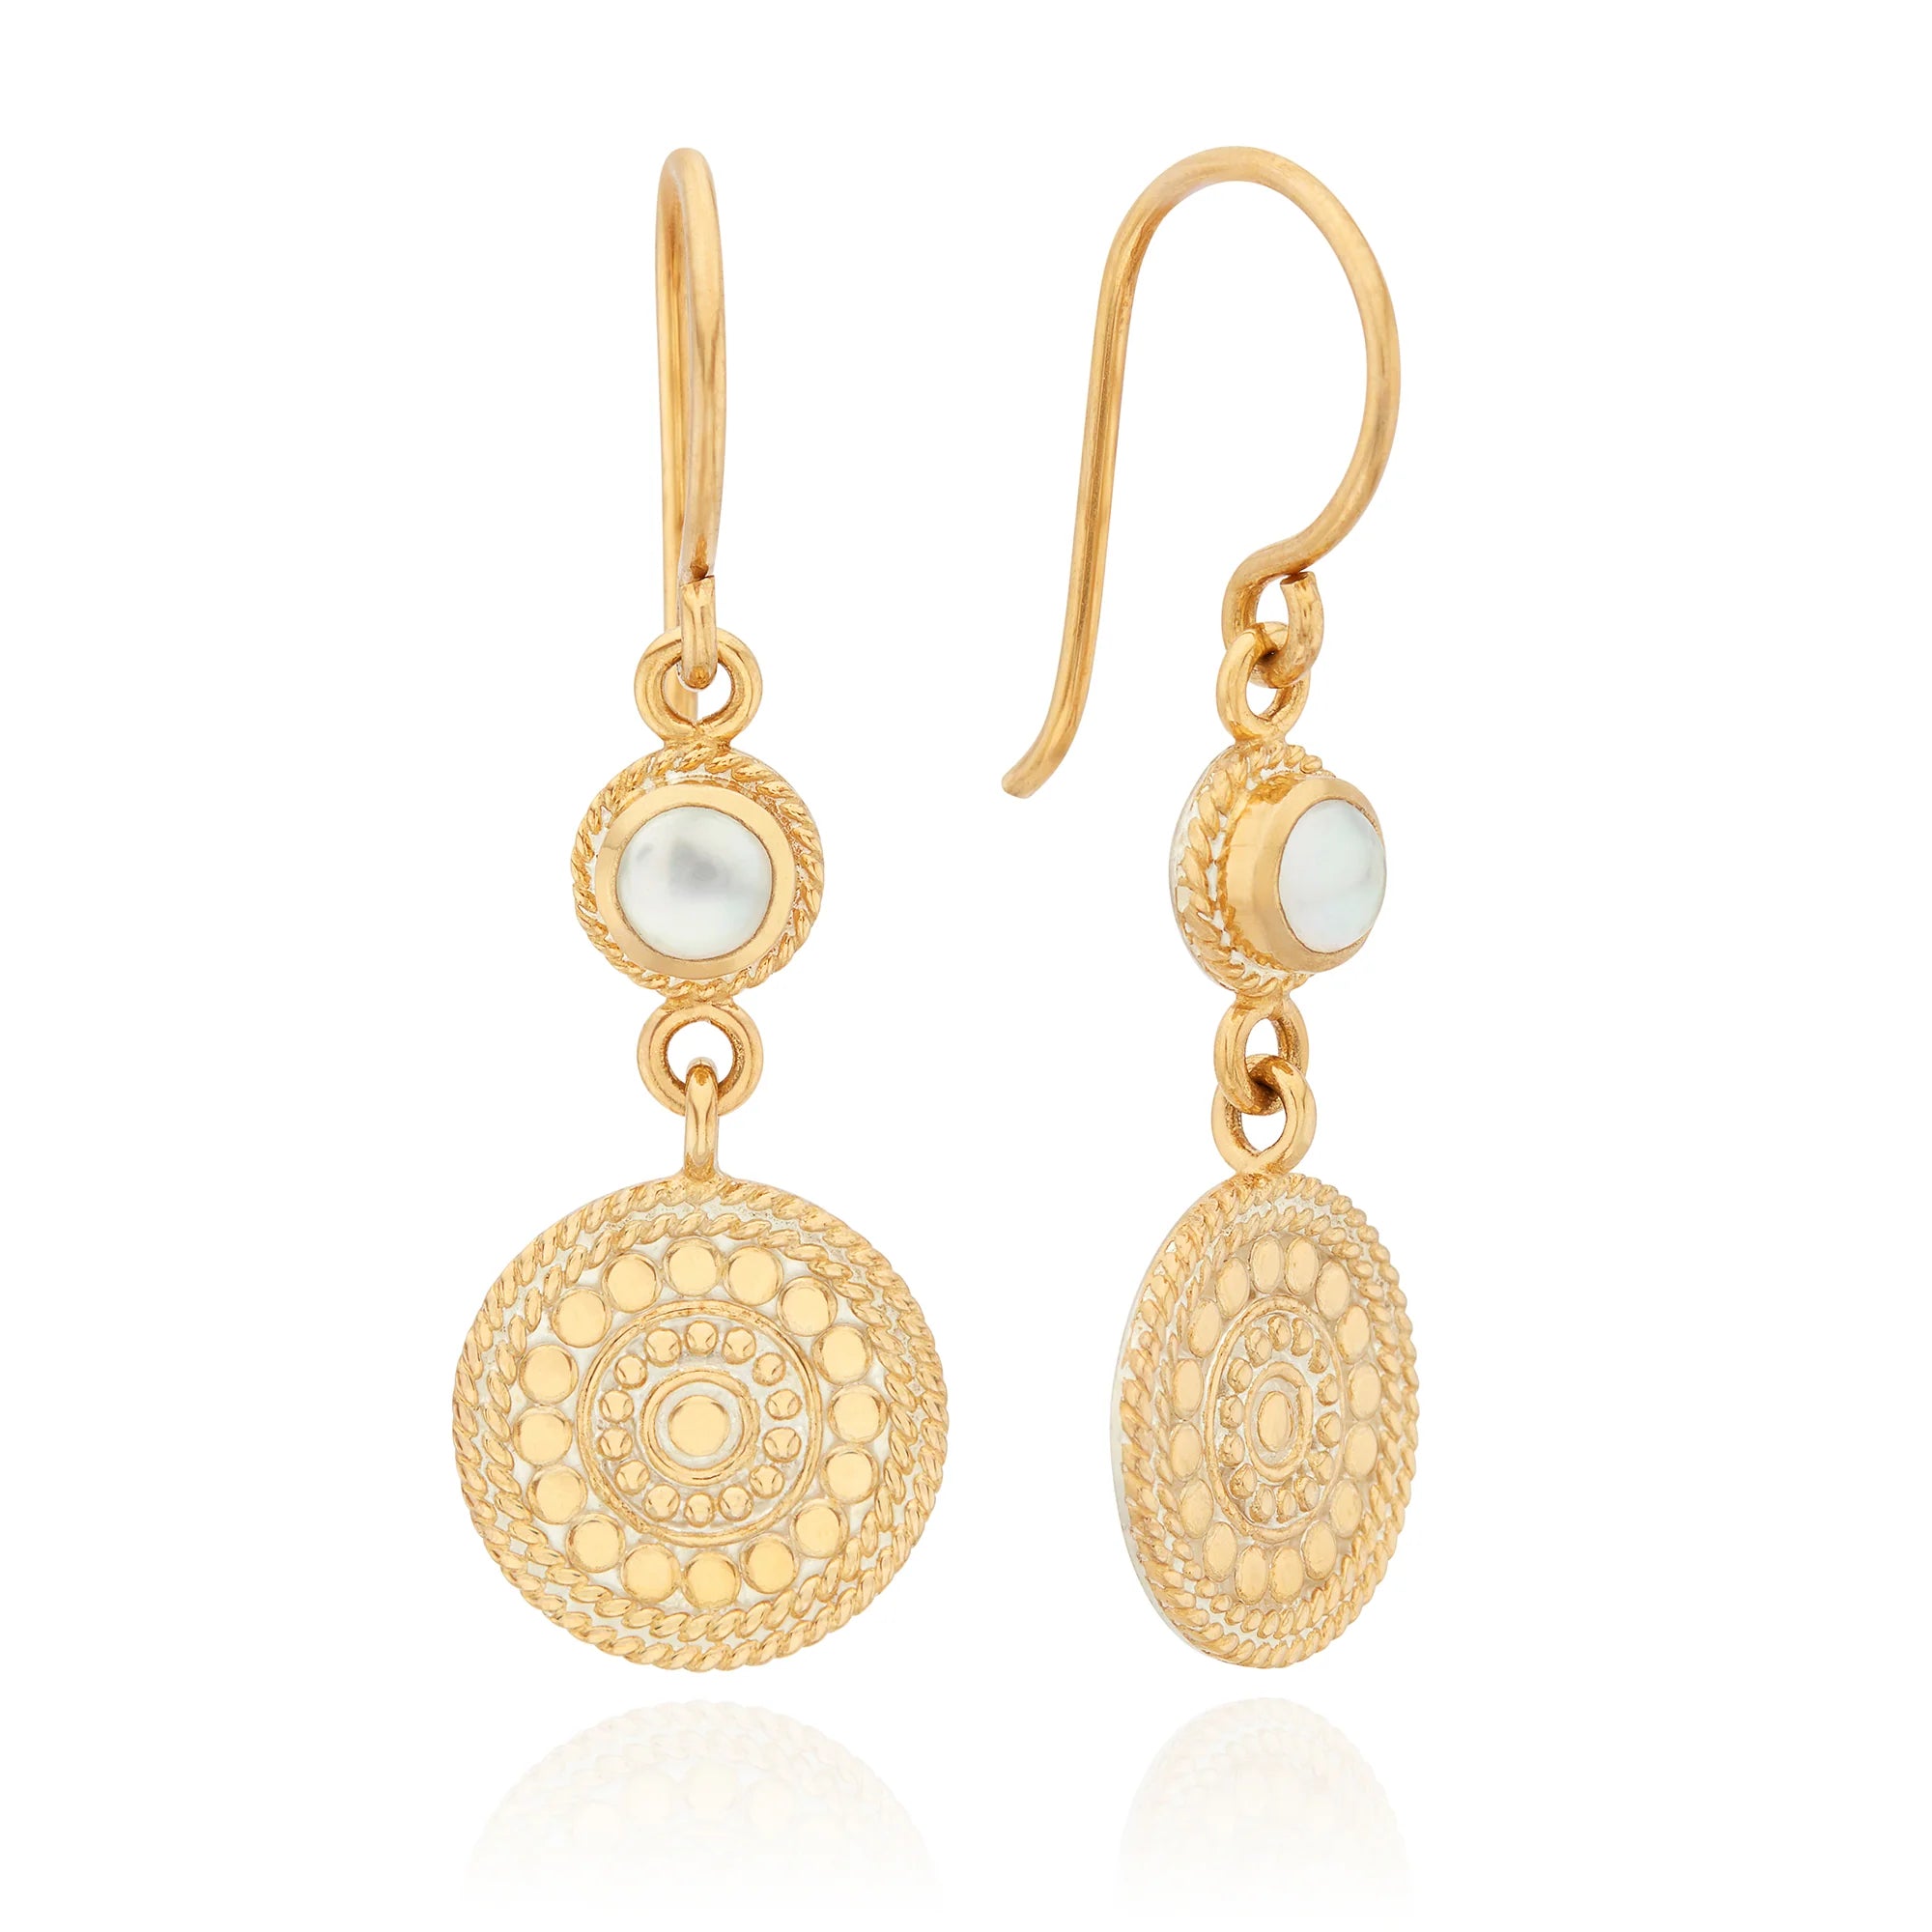 Gold plated sterliing silver drop earrings featuring mother of pearl and charm with dot work